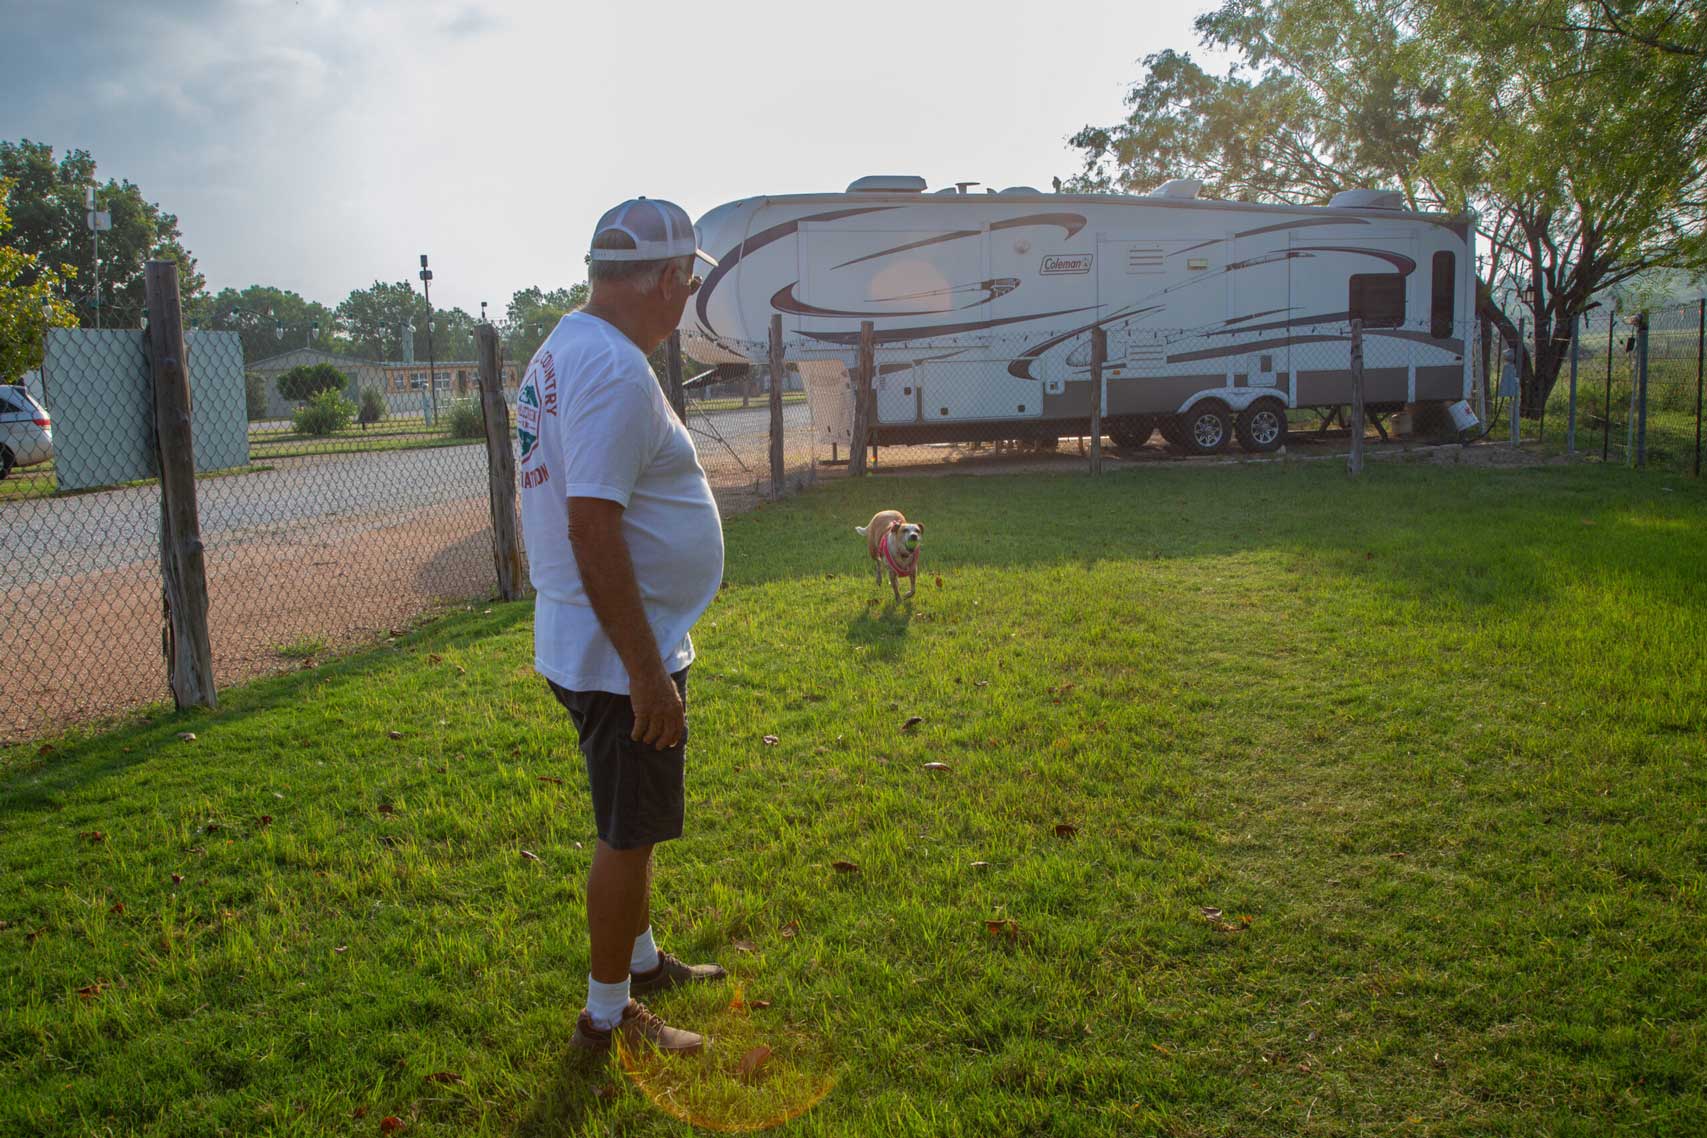 A man and his dog enjoying the pet-friendly outdoor space at an RV park near Blanco, TX, with a spacious trailer in the background